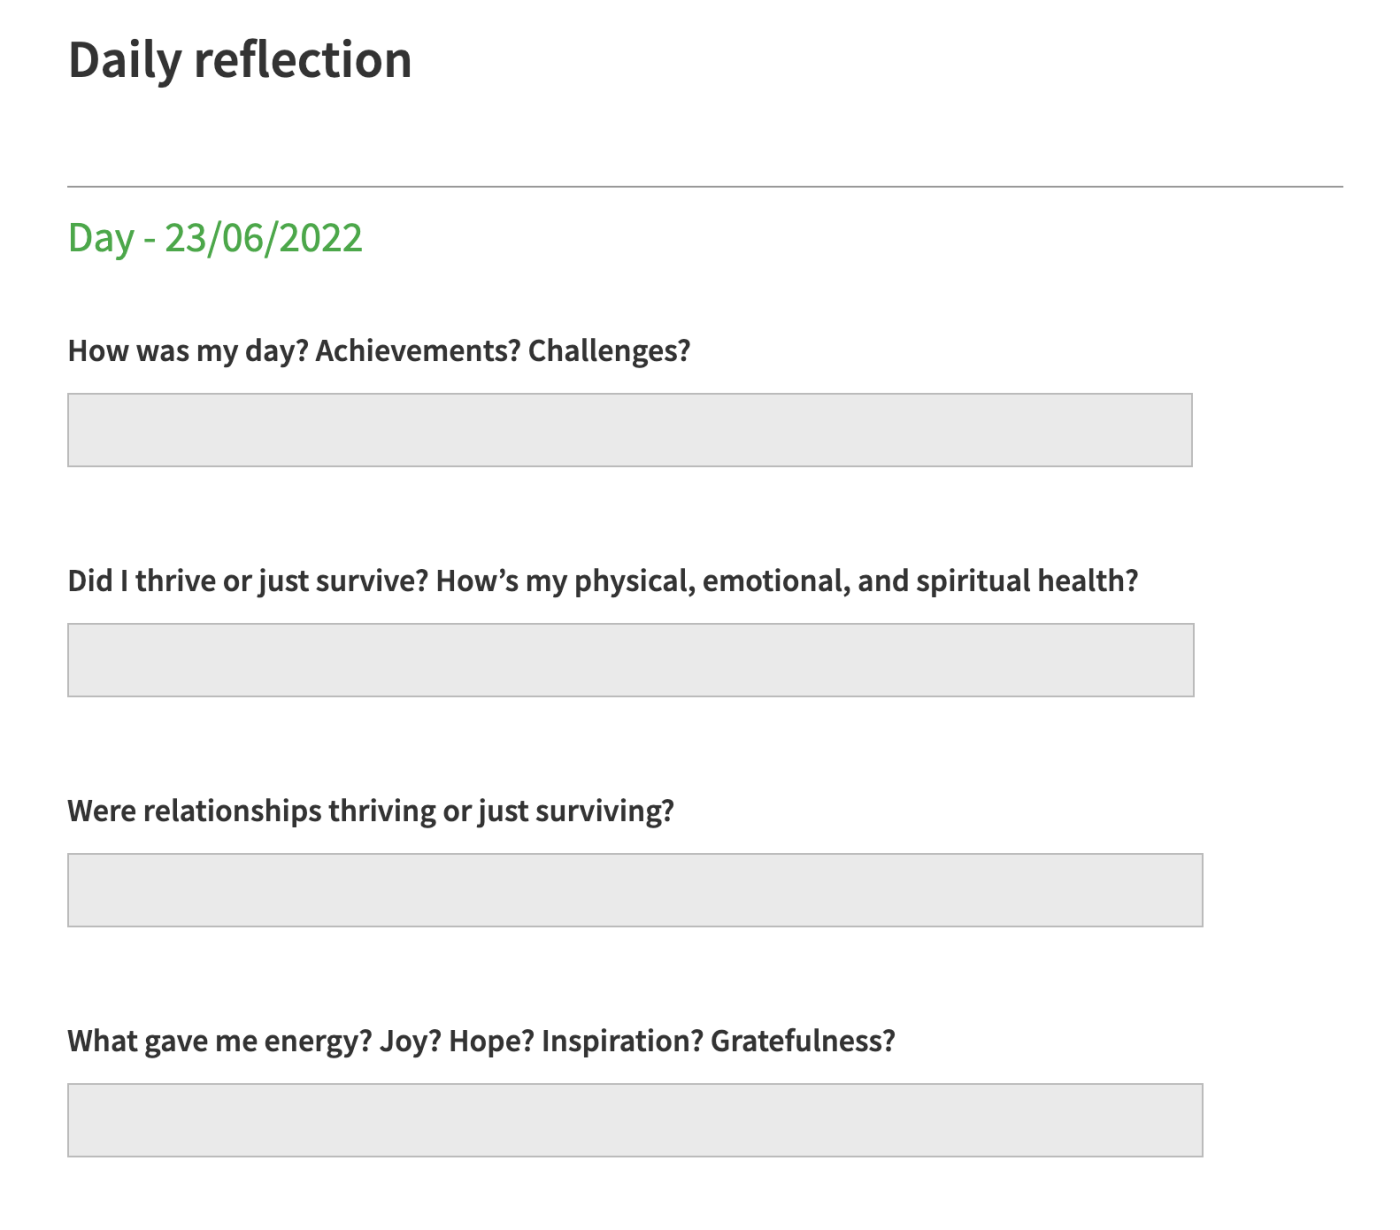 Evernote's daily reflection template